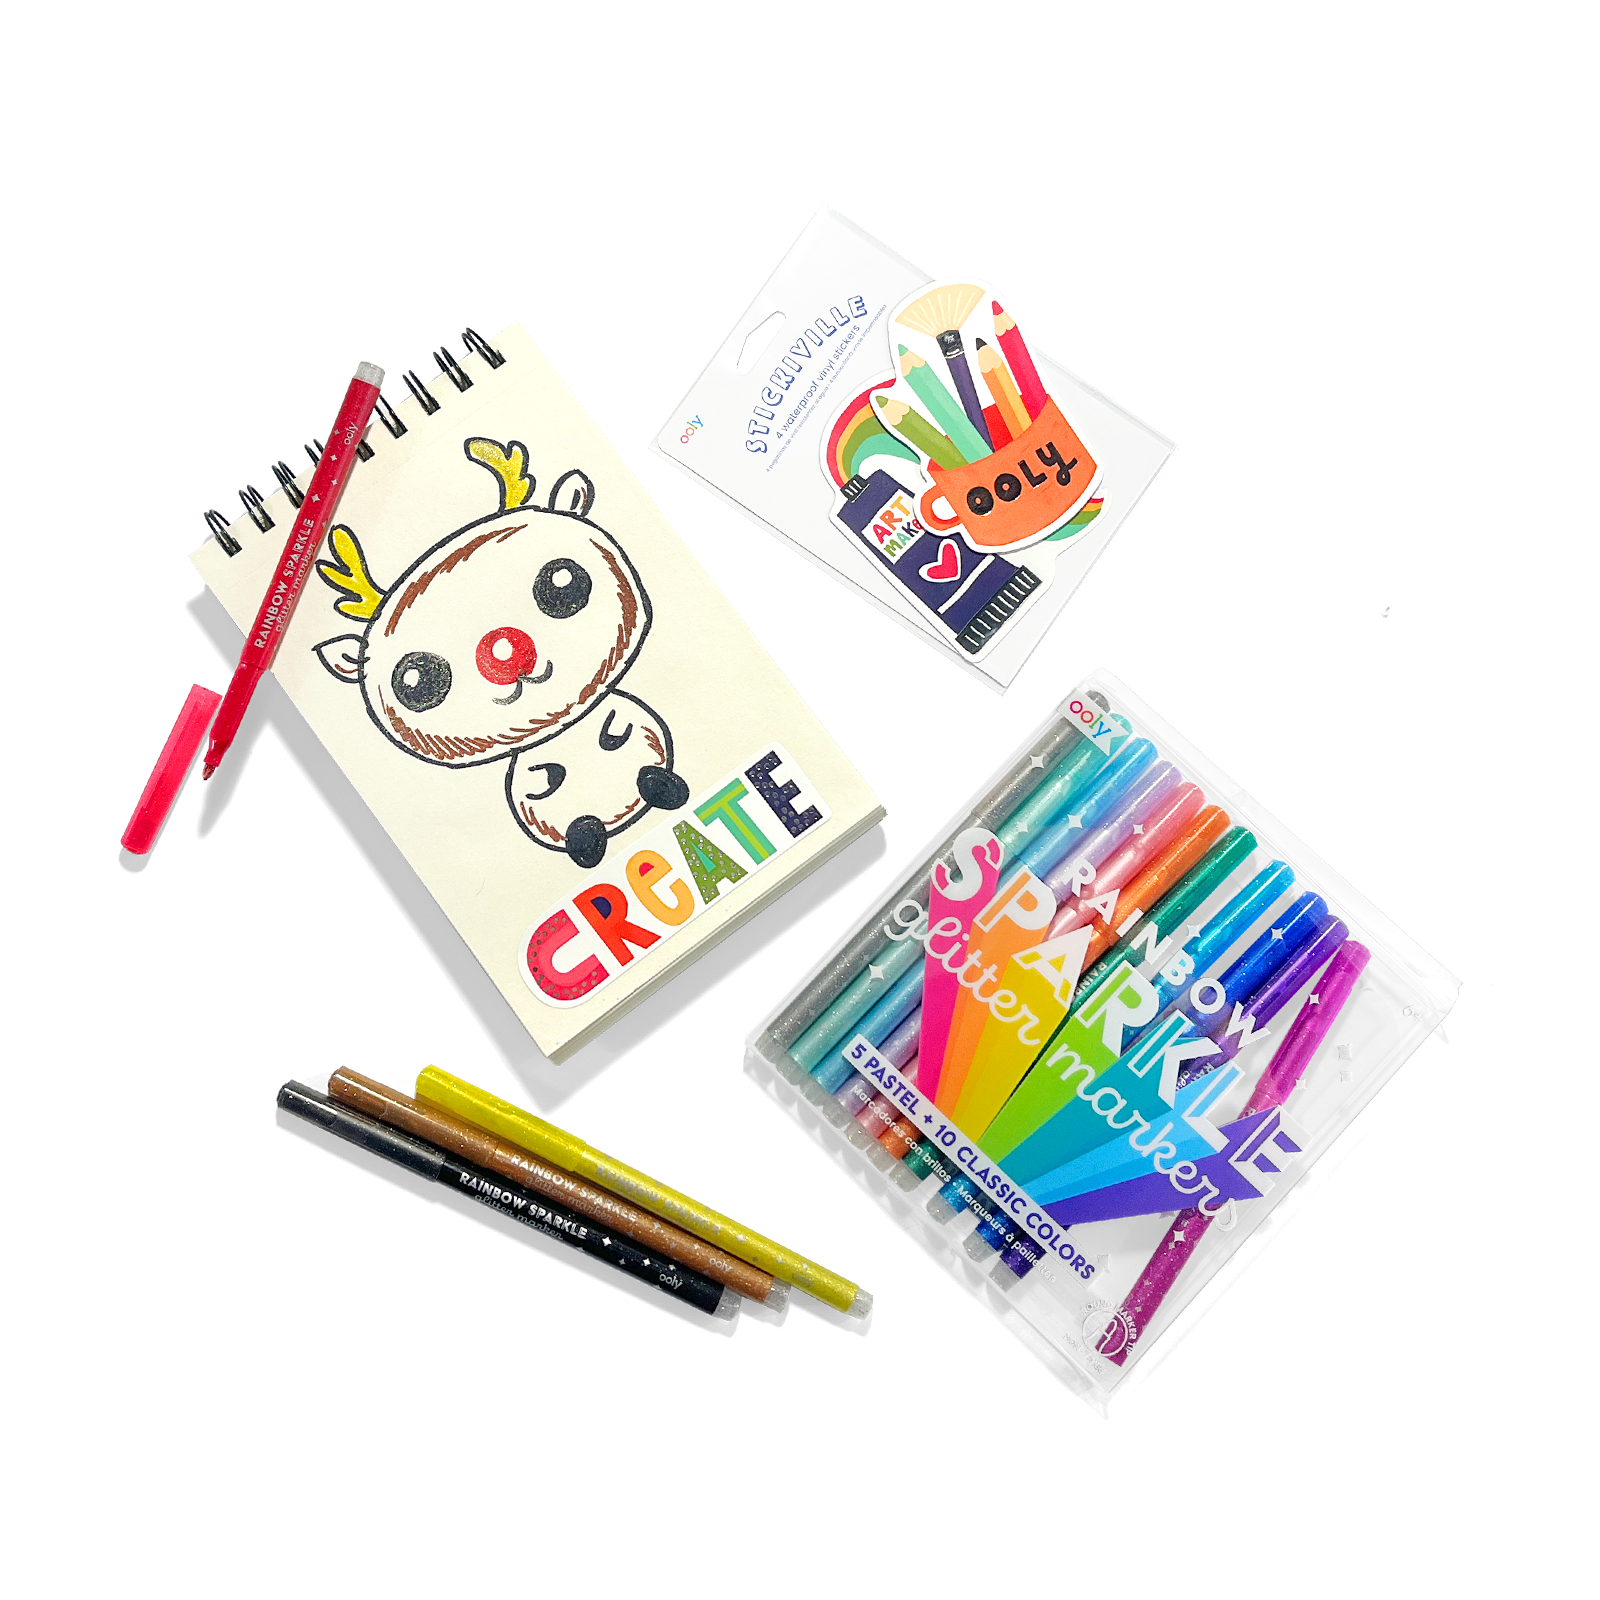 OOLY Holiday Gift Pack markers, stickers and sketchbook out of packaging